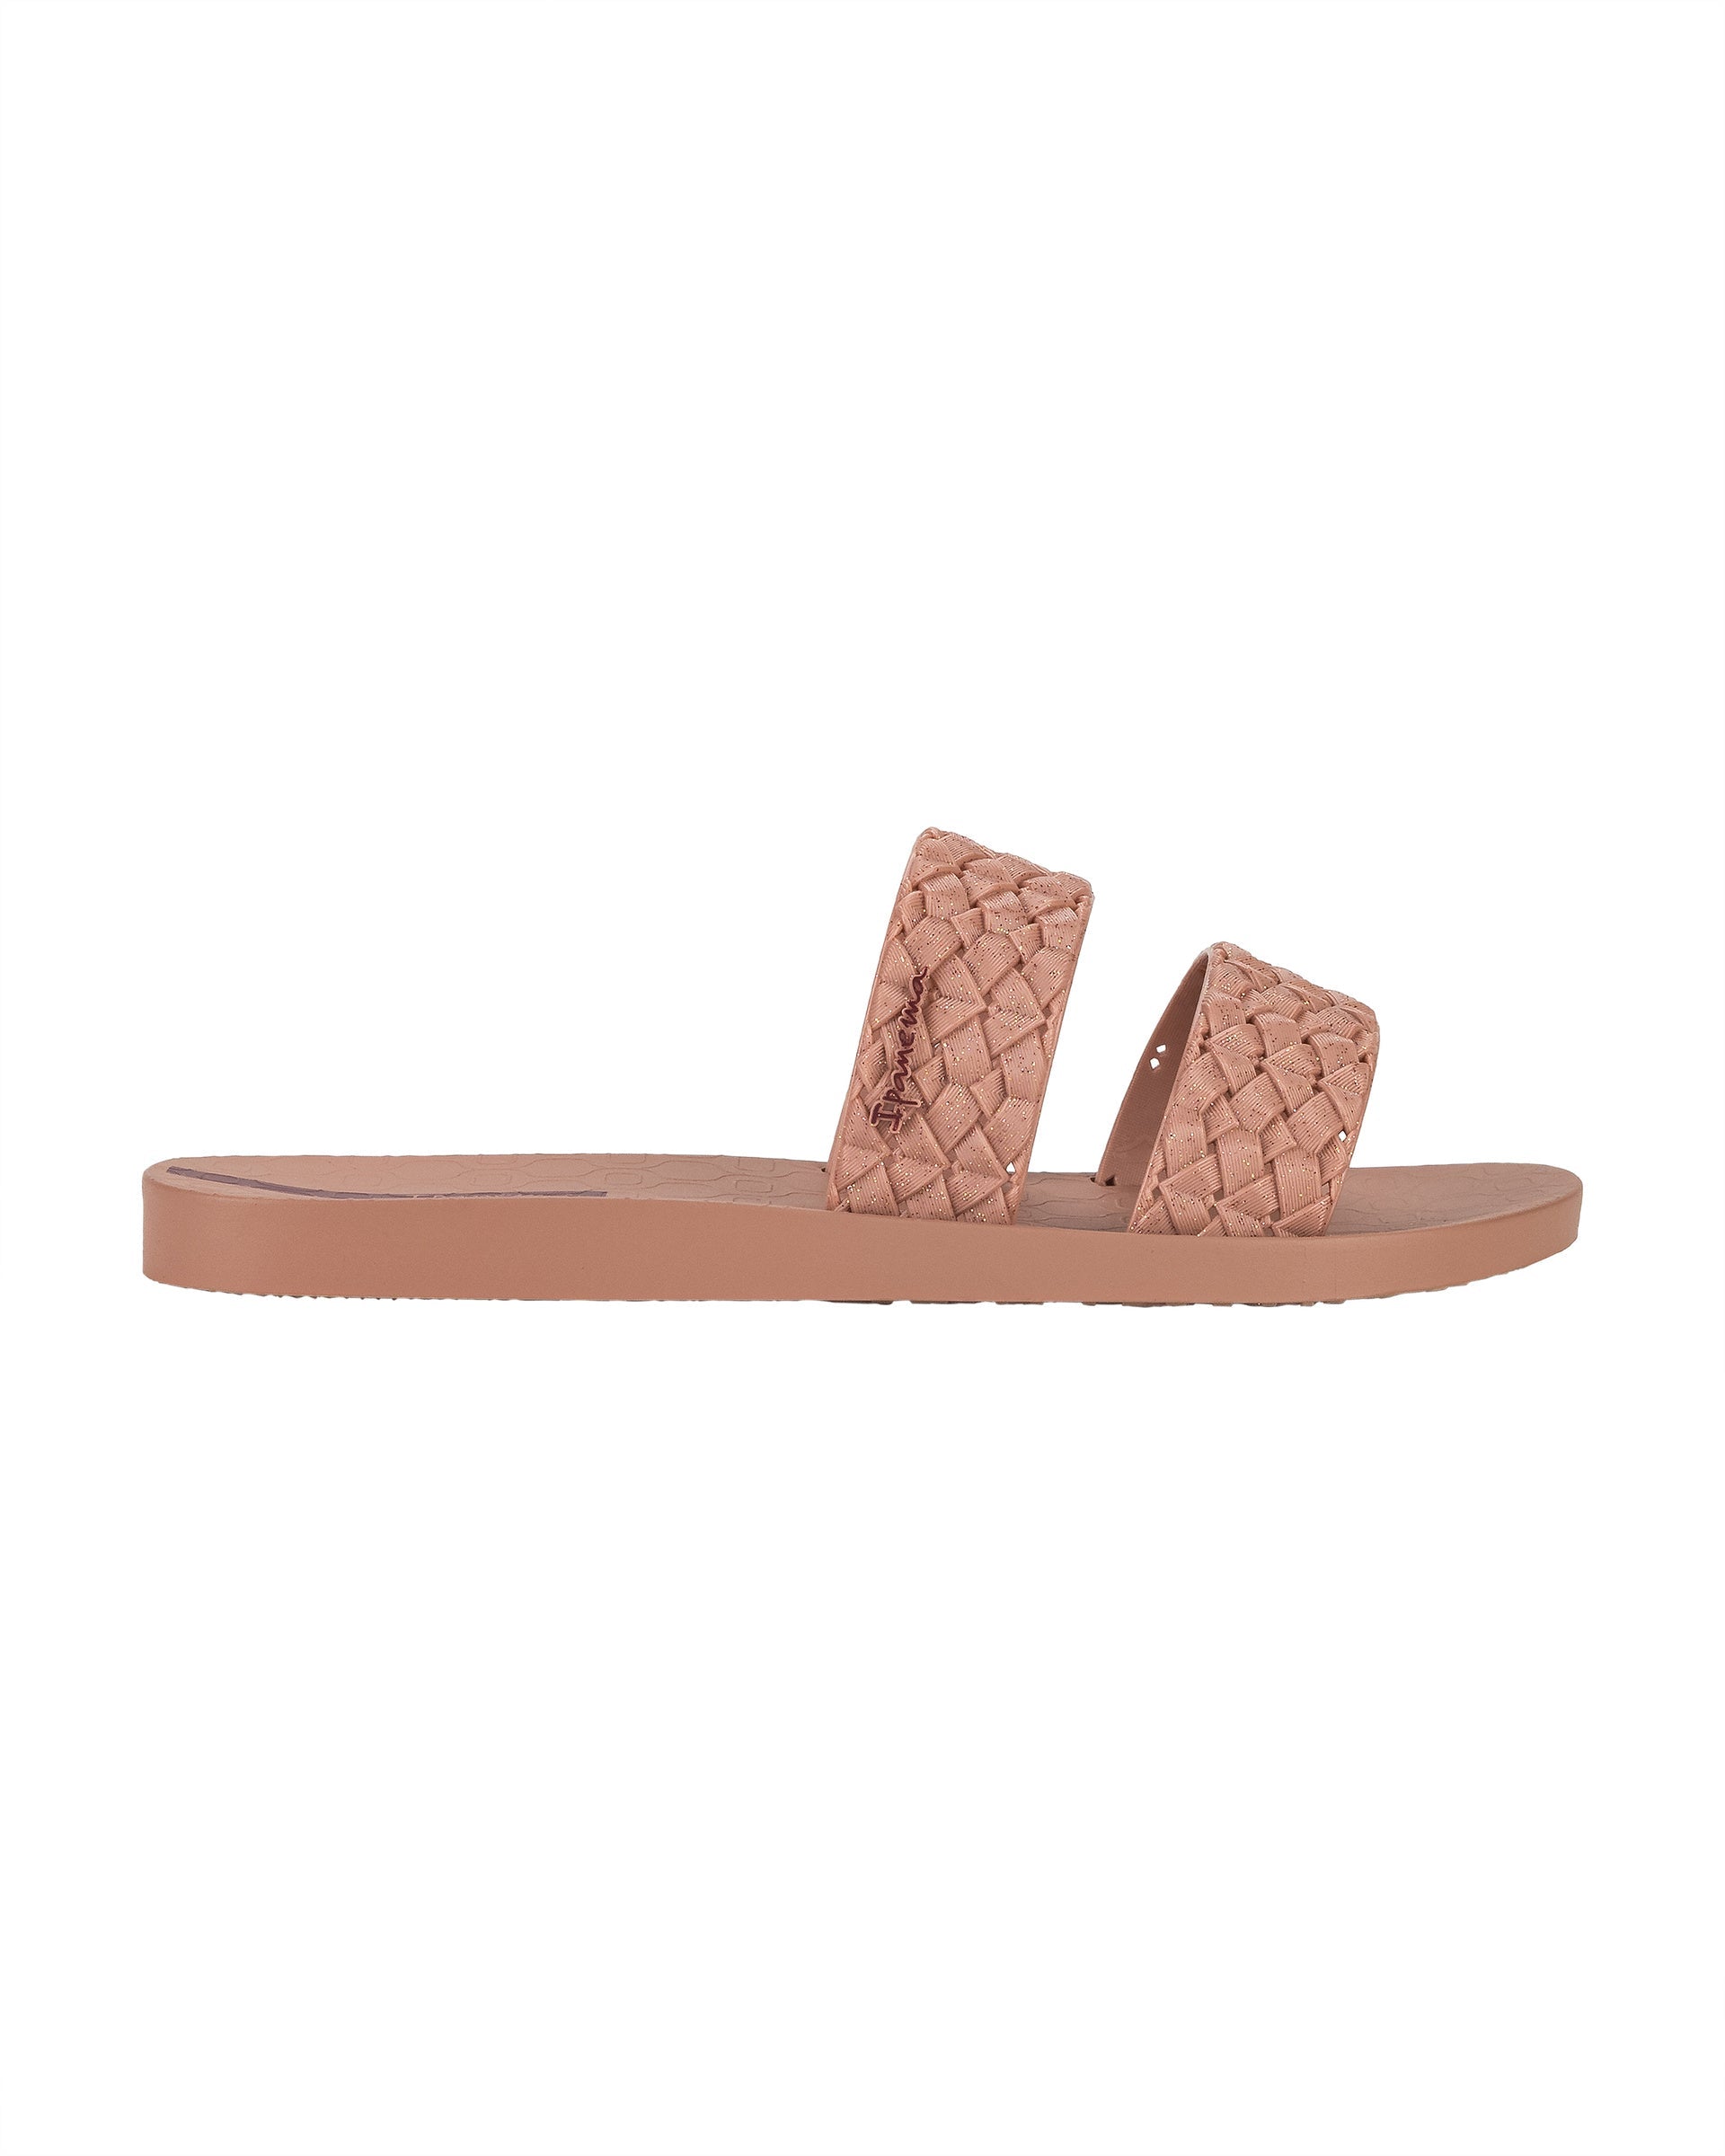 Outer side view of a pink Ipanema Renda women's slide with braided pink glitter straps.